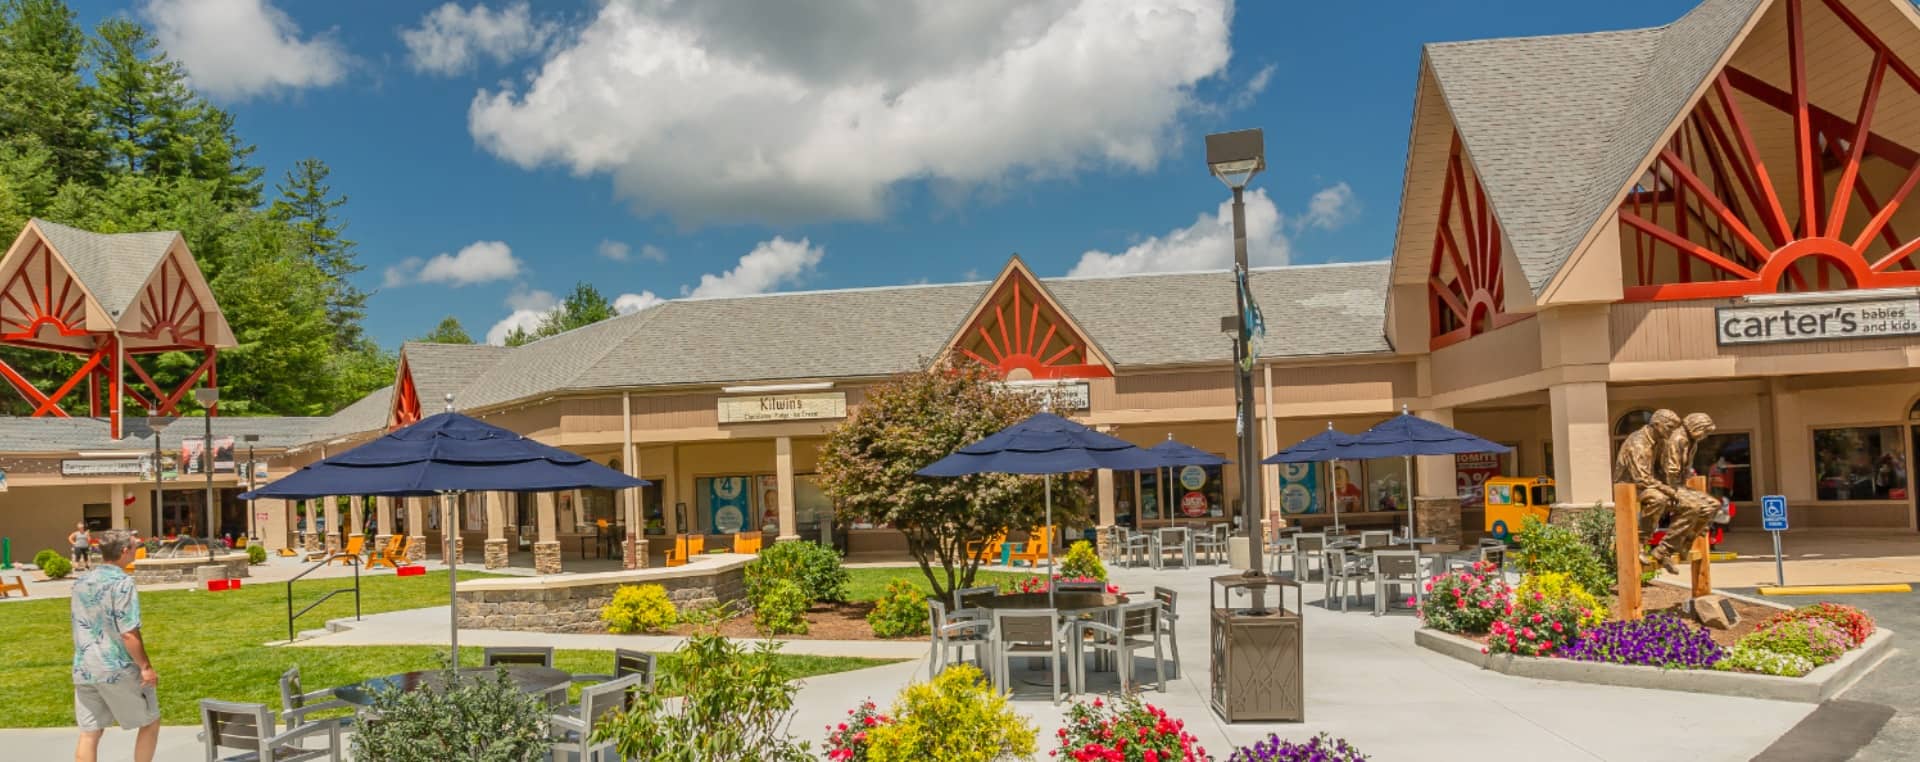 Tanger Outlets Blowing Rock Center Images